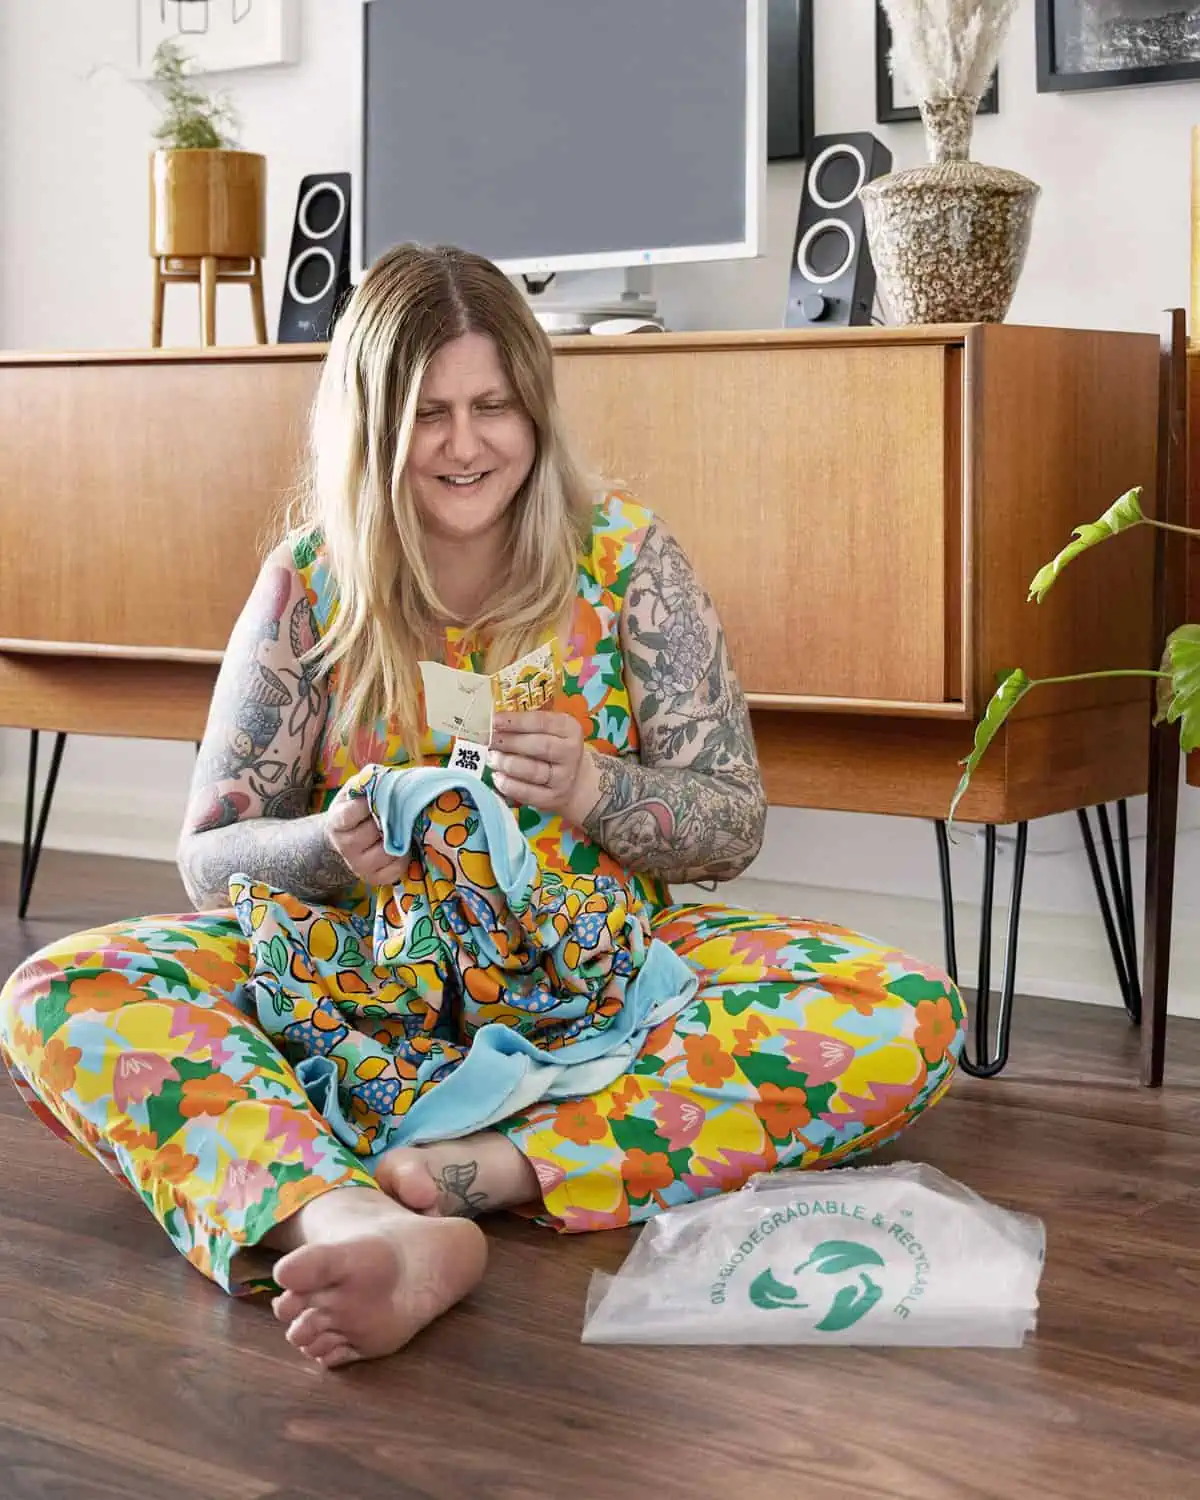 ID: A portrait image. Fay sits on the floor, behind Fay is a mid century furniture, with computer on top and pictures on the wall. Fay is wearing a Lucy &amp; Yak boiler suit in bright pattern. In Fay’s hands are a Lucy and Yak jumper, and Fay is reading the label which goes into detail about their sustainable manufacturing process and biodegradable packaging.